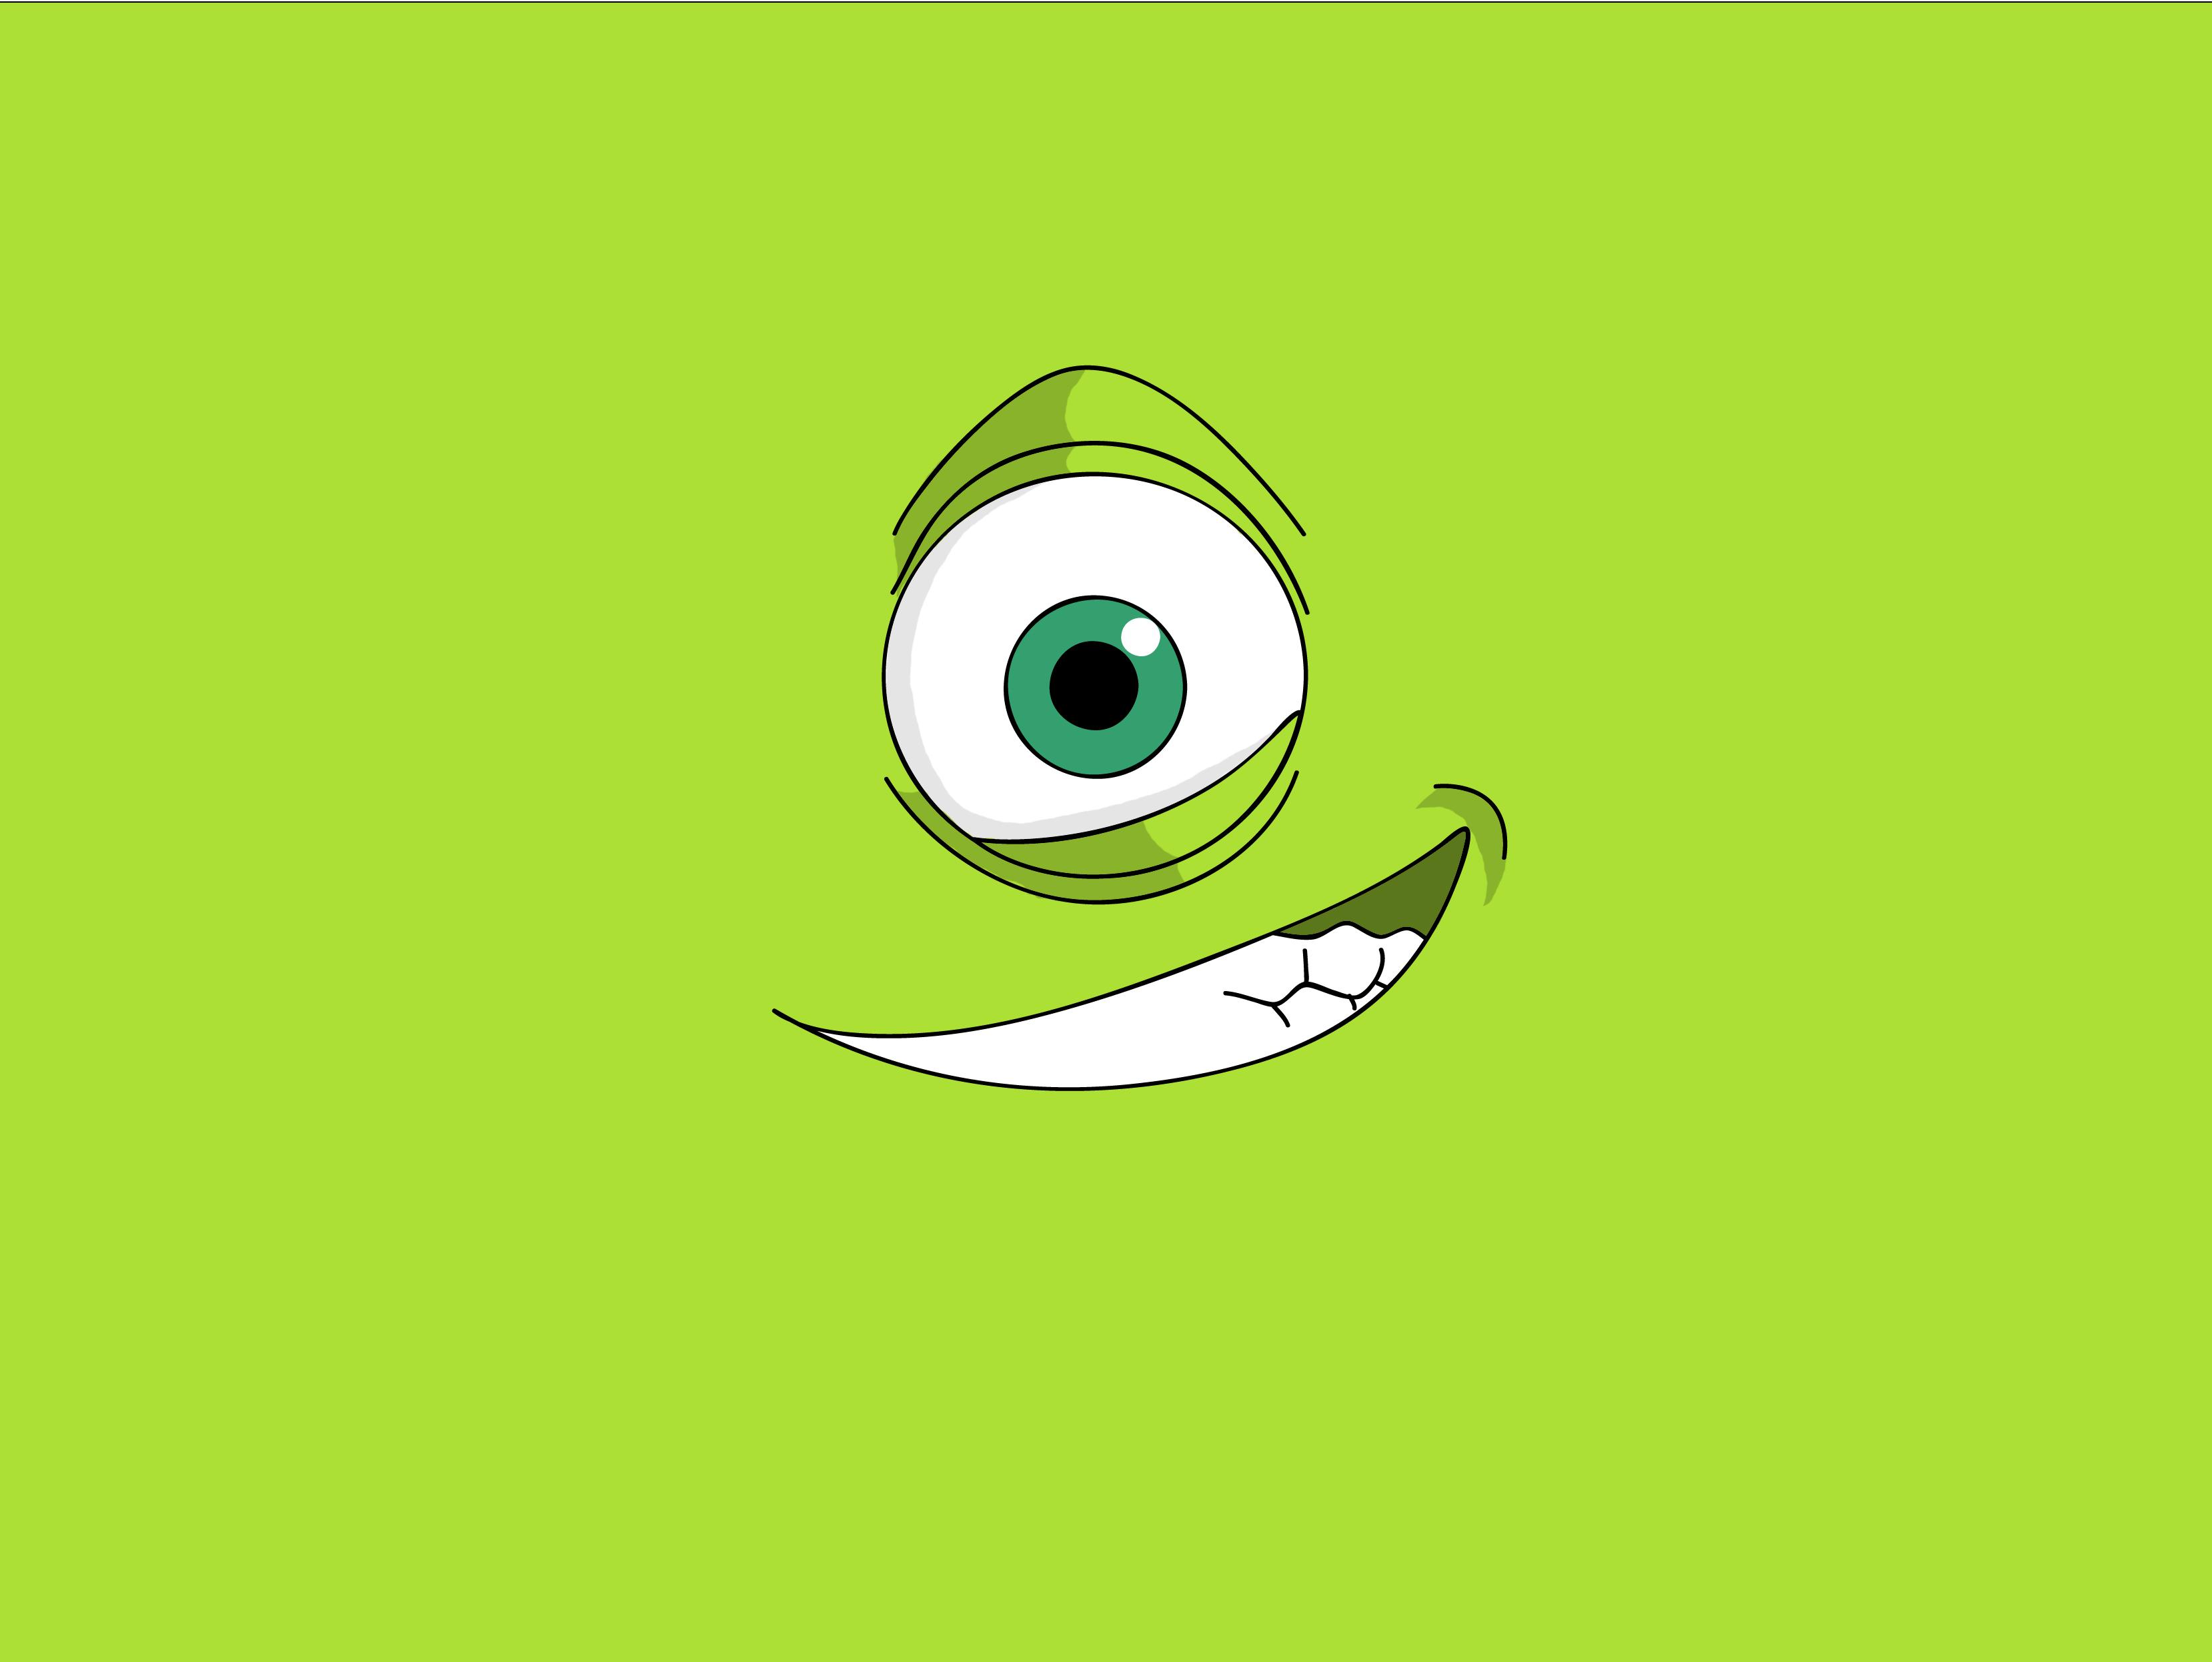 Monsters Inc Wallpapers and Background Images   stmednet